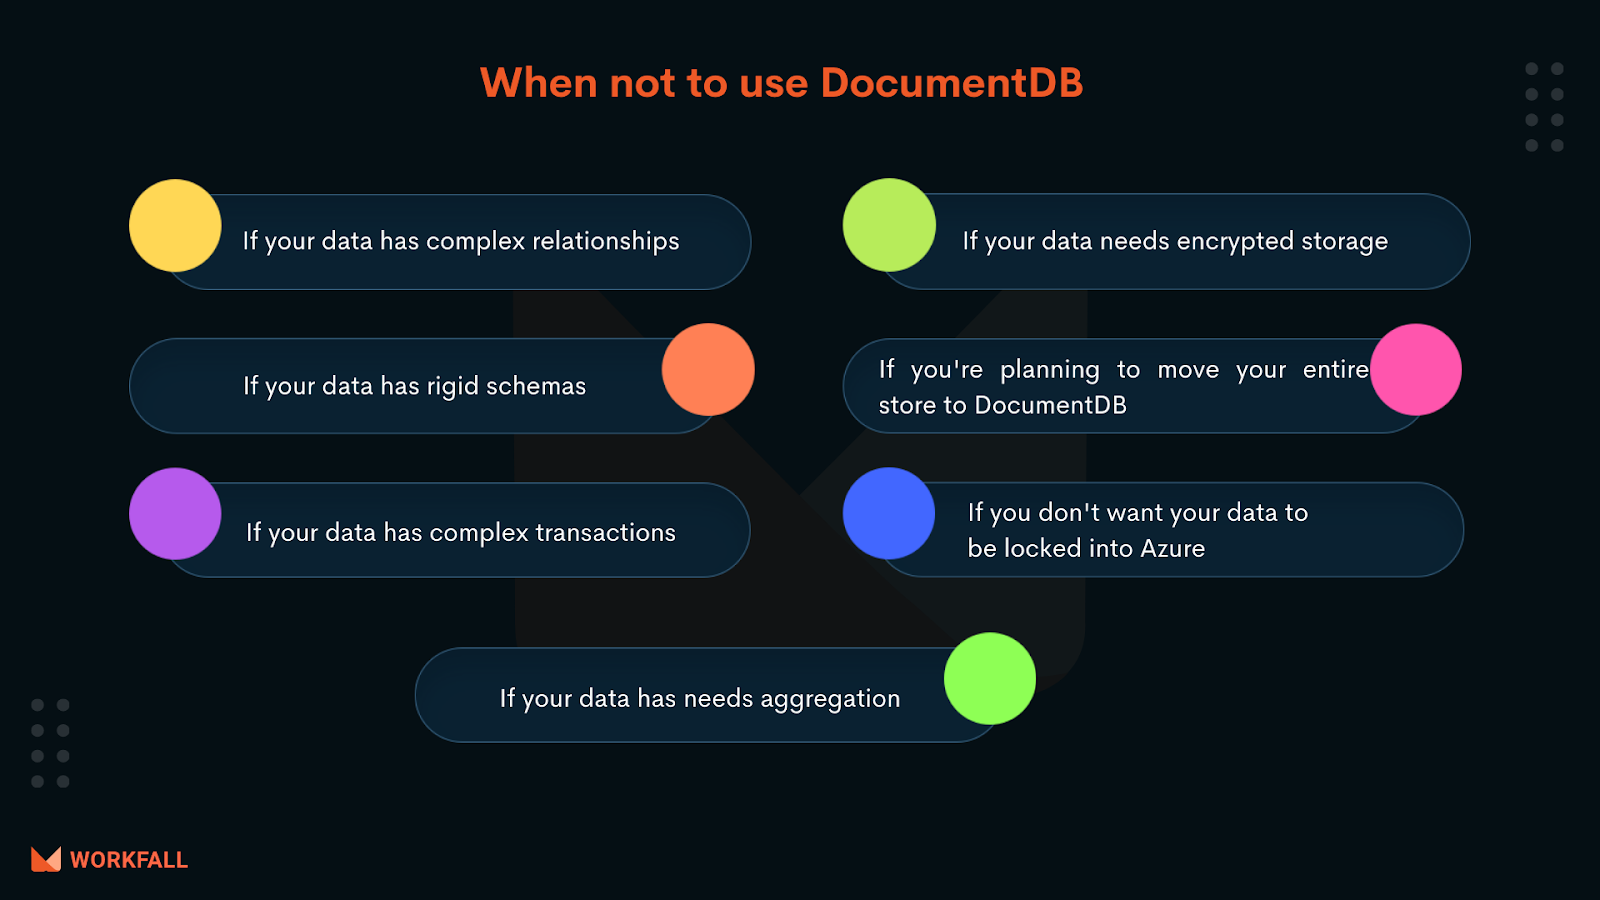 When not to use AWS DocumentDB